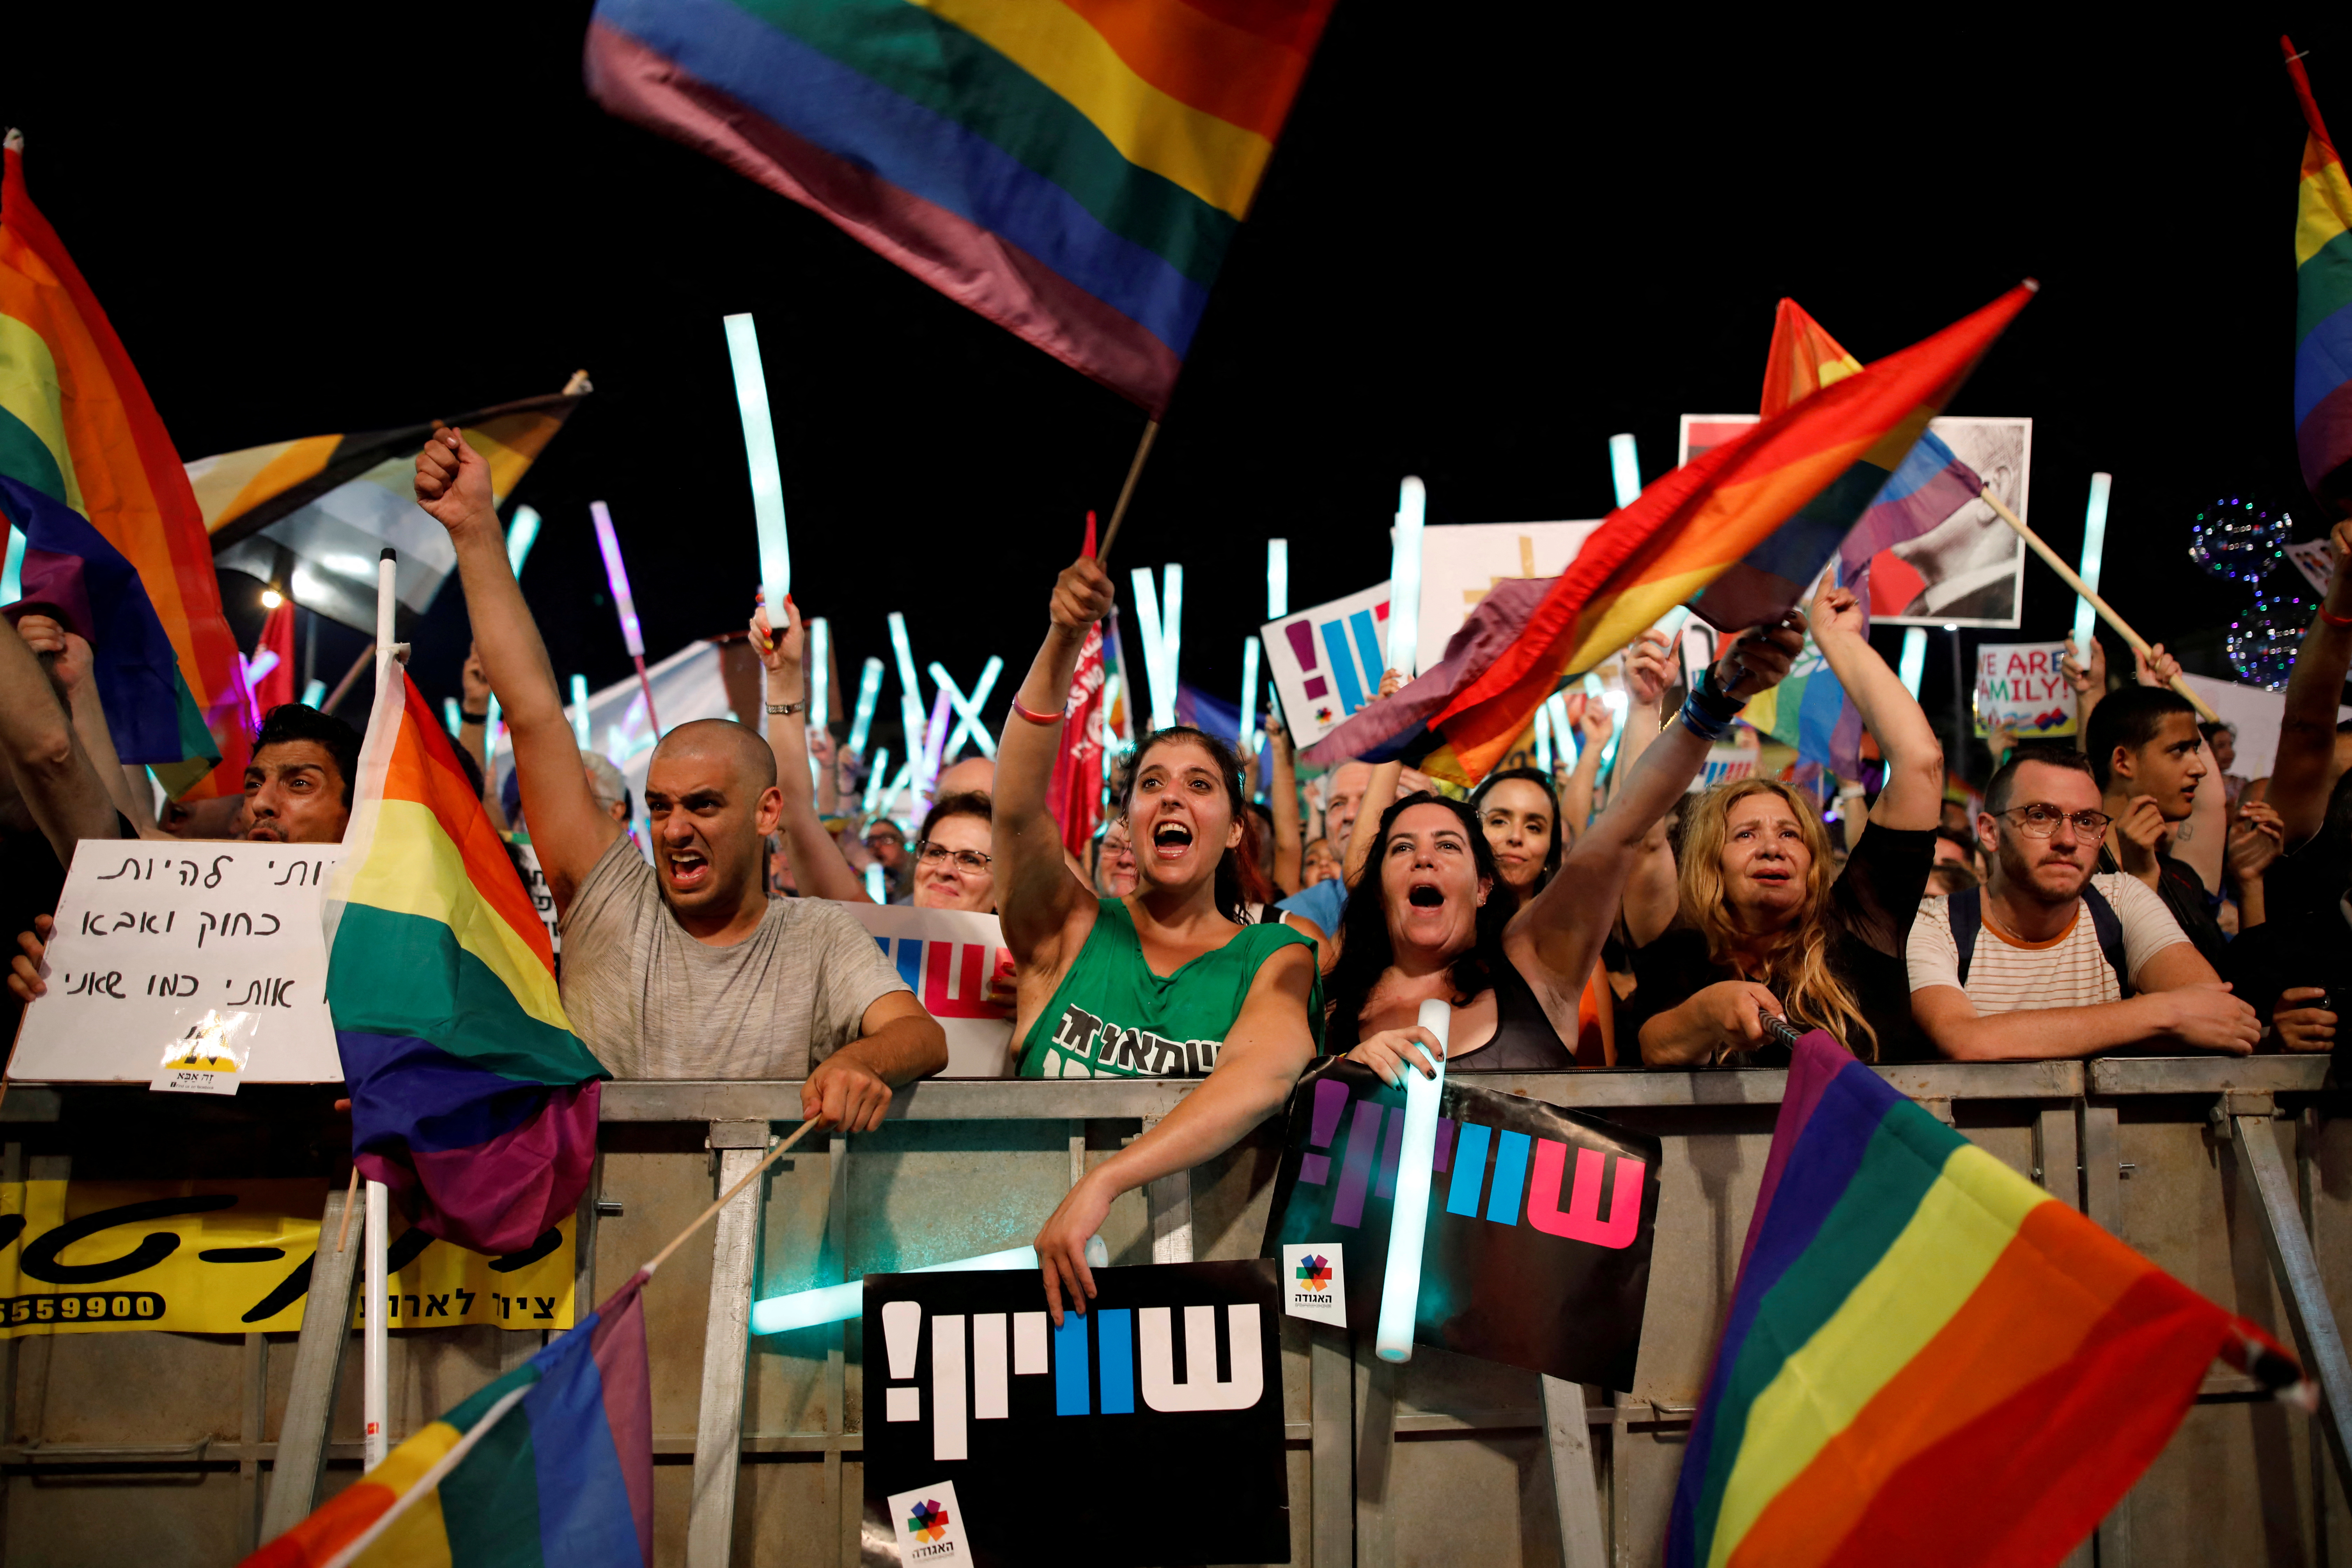 Israel lifts restrictions on same-sex surrogacy